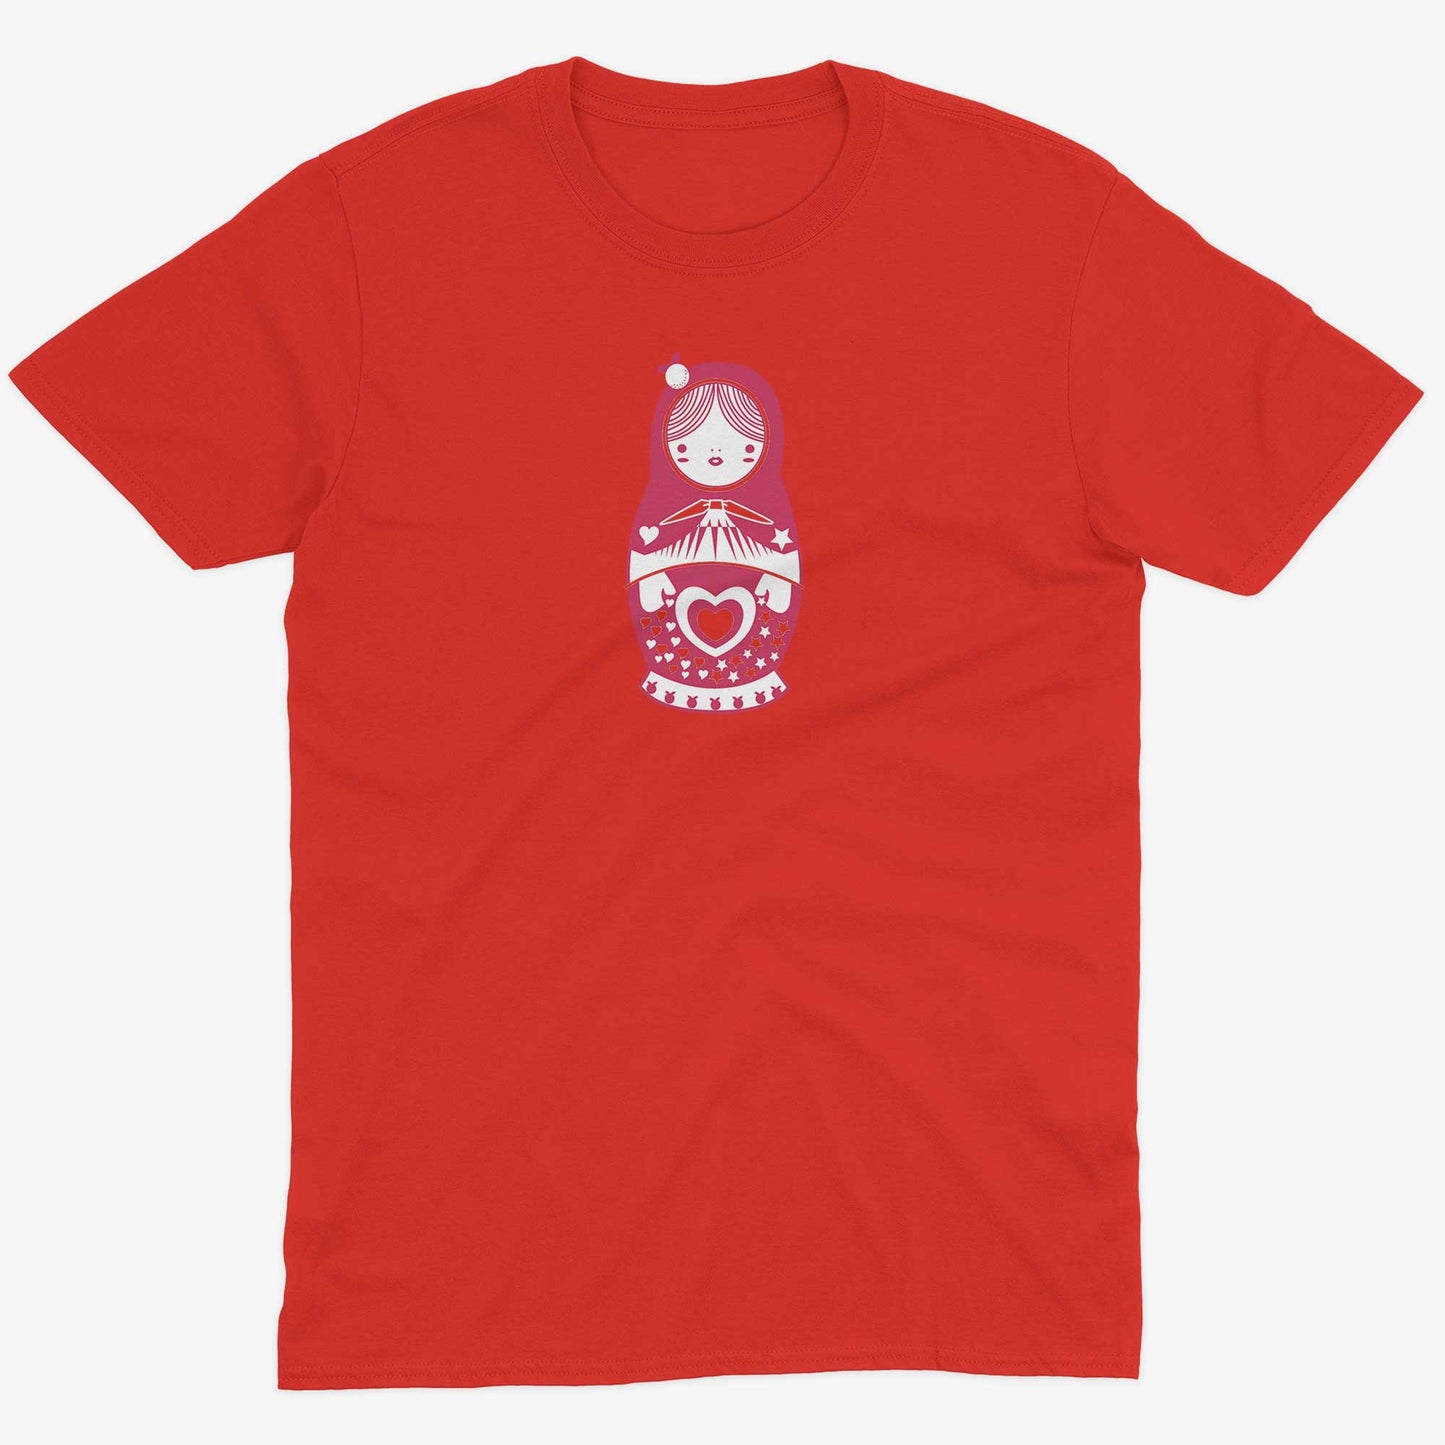 Russian Doll Unisex Or Women's Cotton T-shirt-Red-Unisex